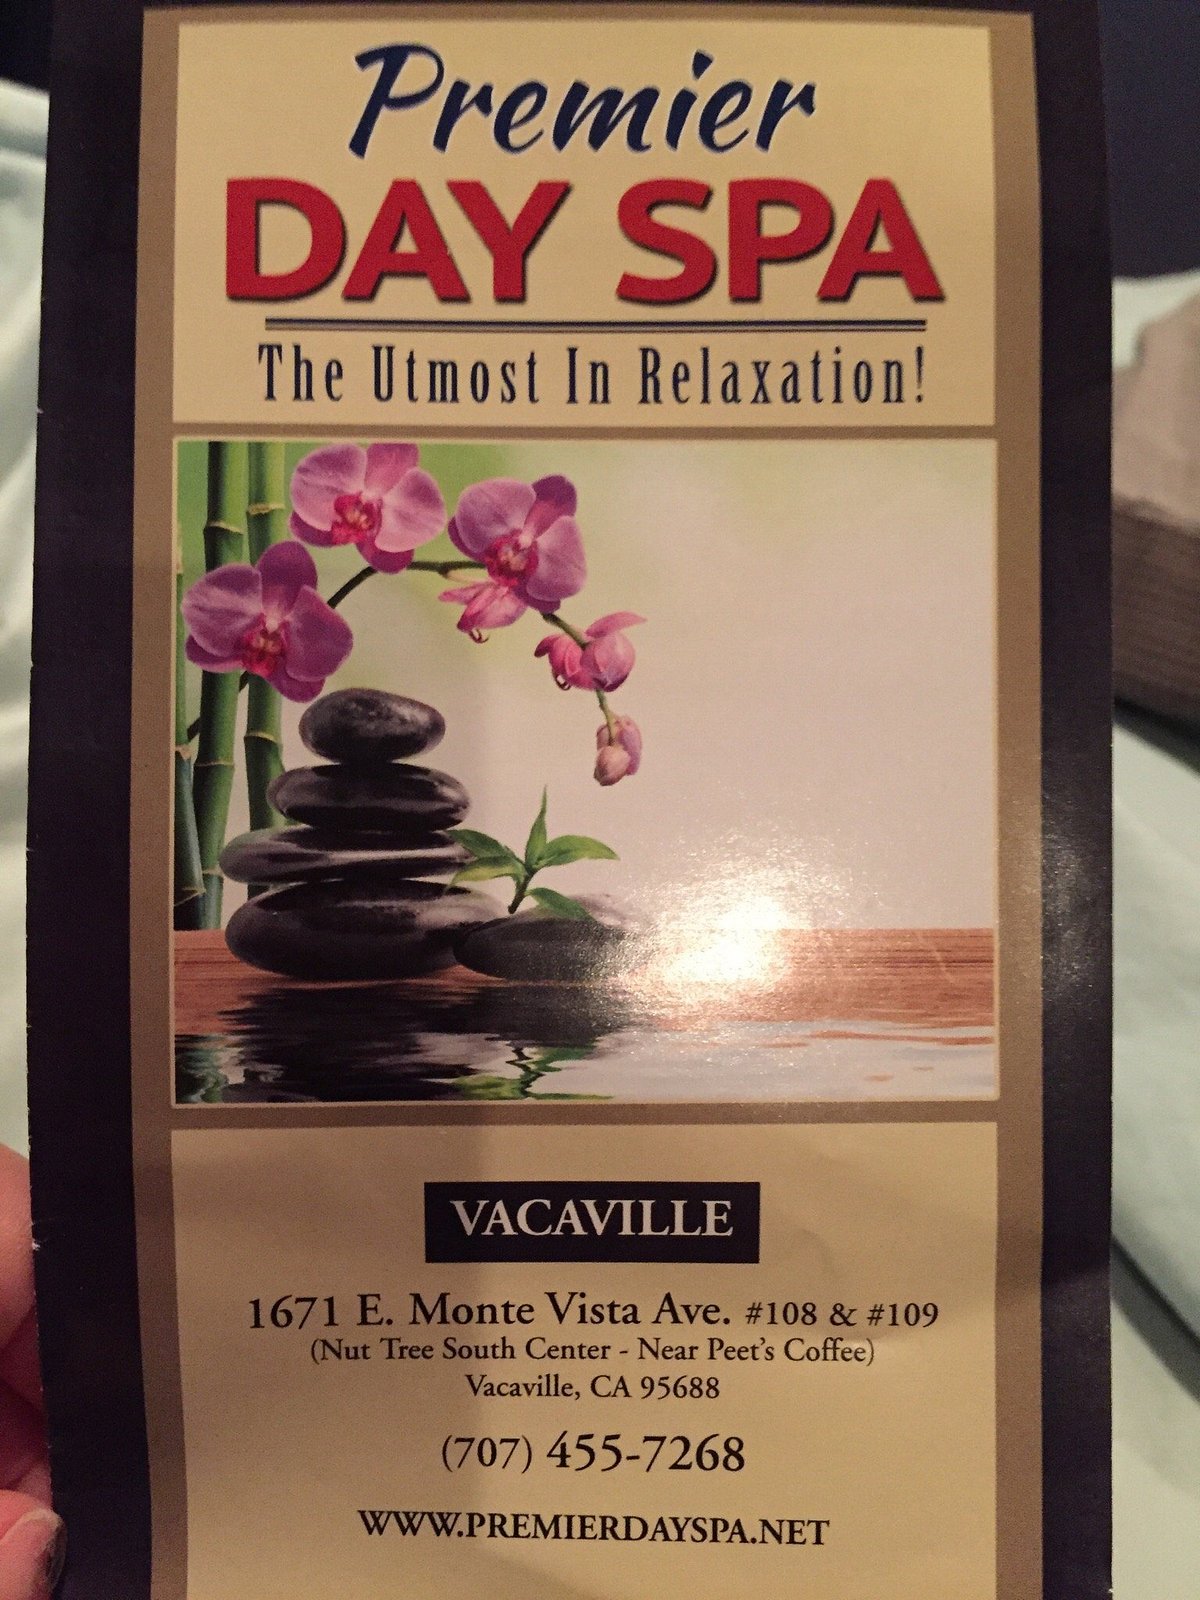 Premier Day Spa Vacaville All You Need To Know Before You Go